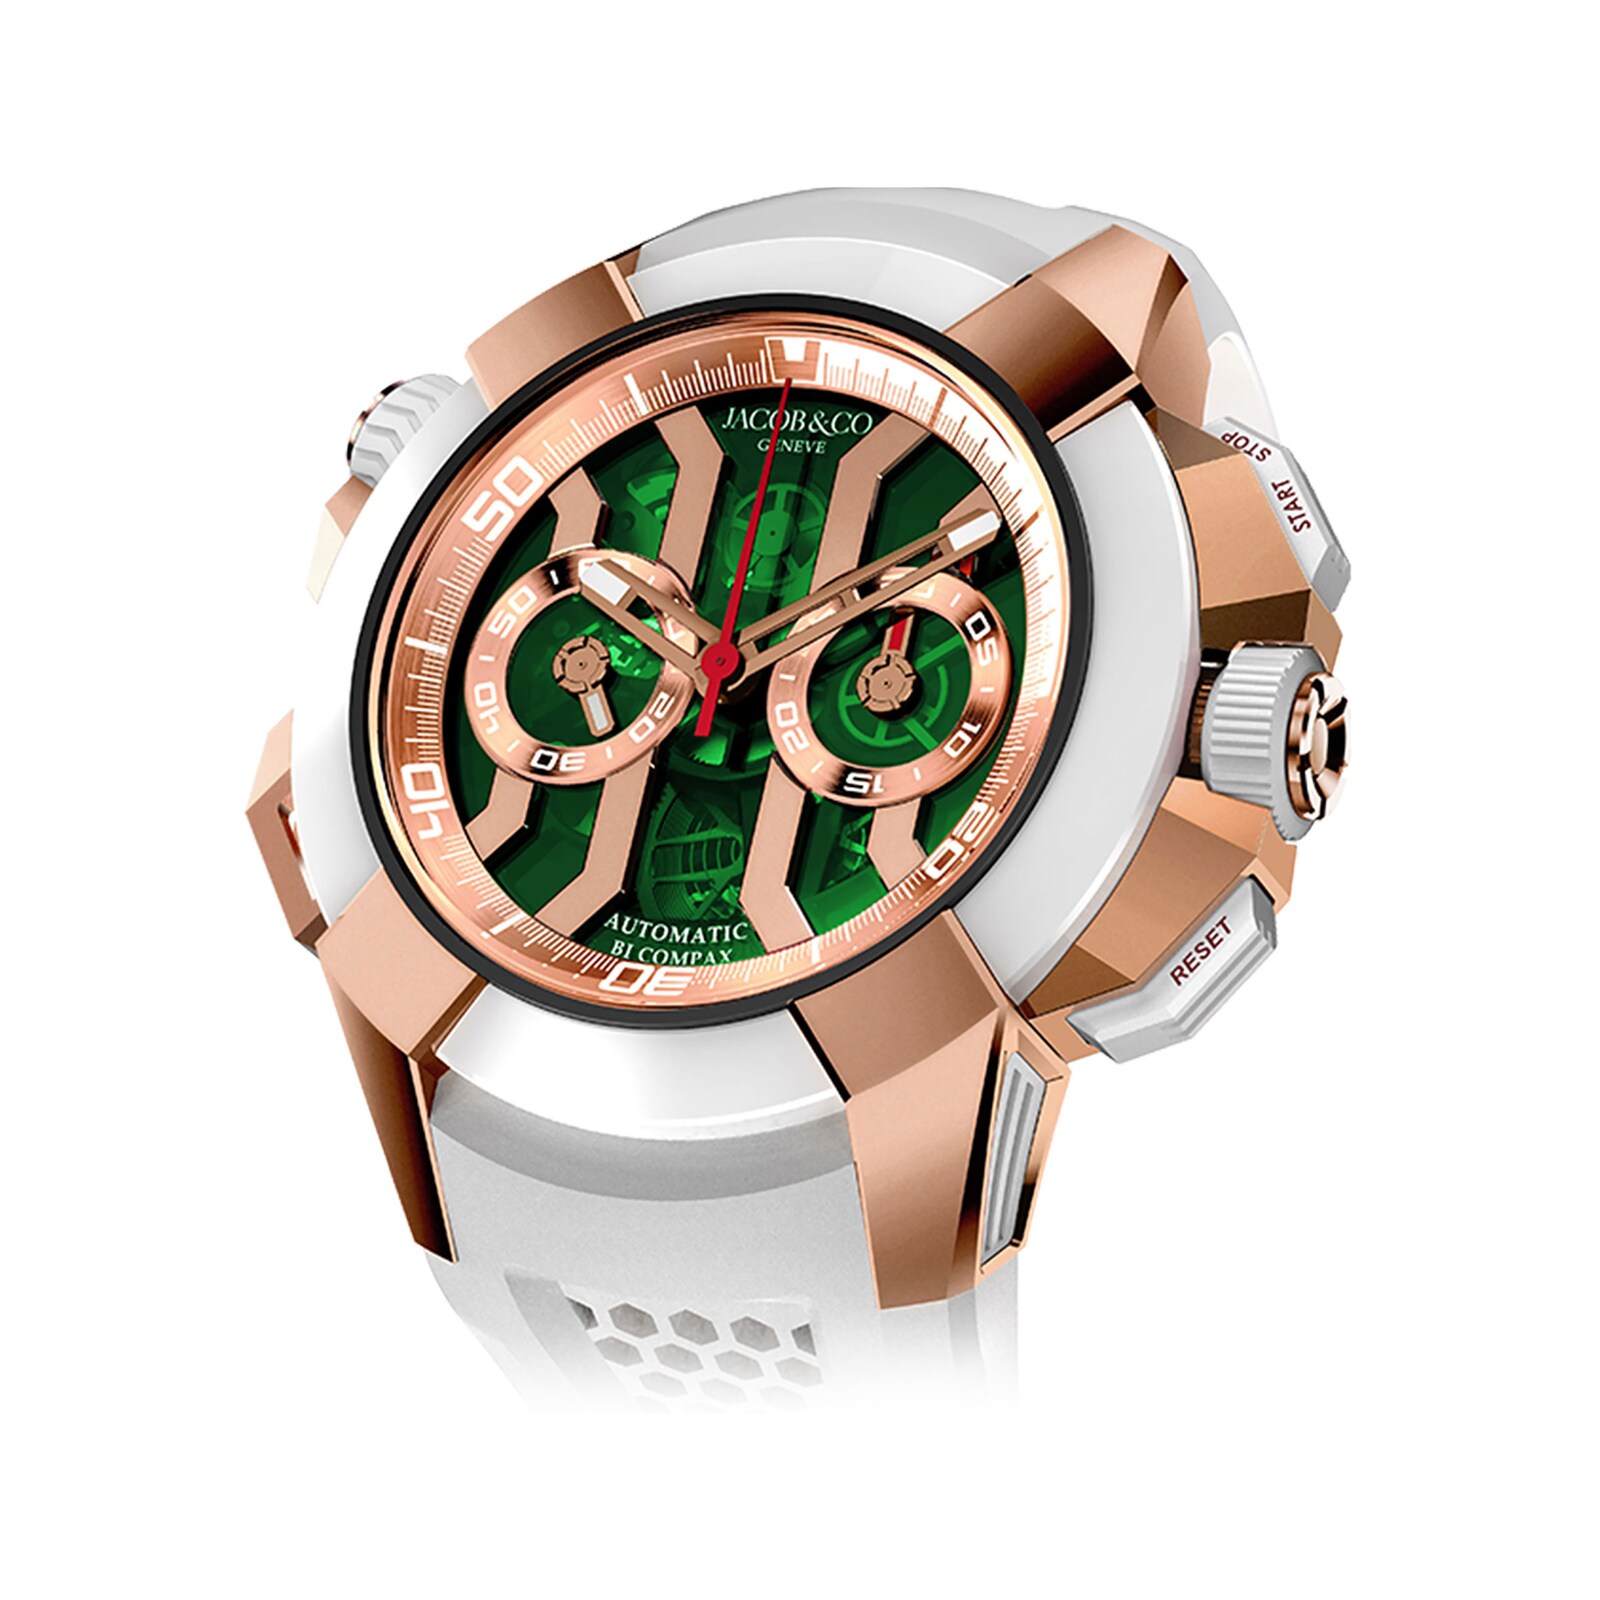 Jacob Co Epic X Chrono Rose Gold Green Dial Ec312 42 Sb Gn A Watches Of Switzerland Us